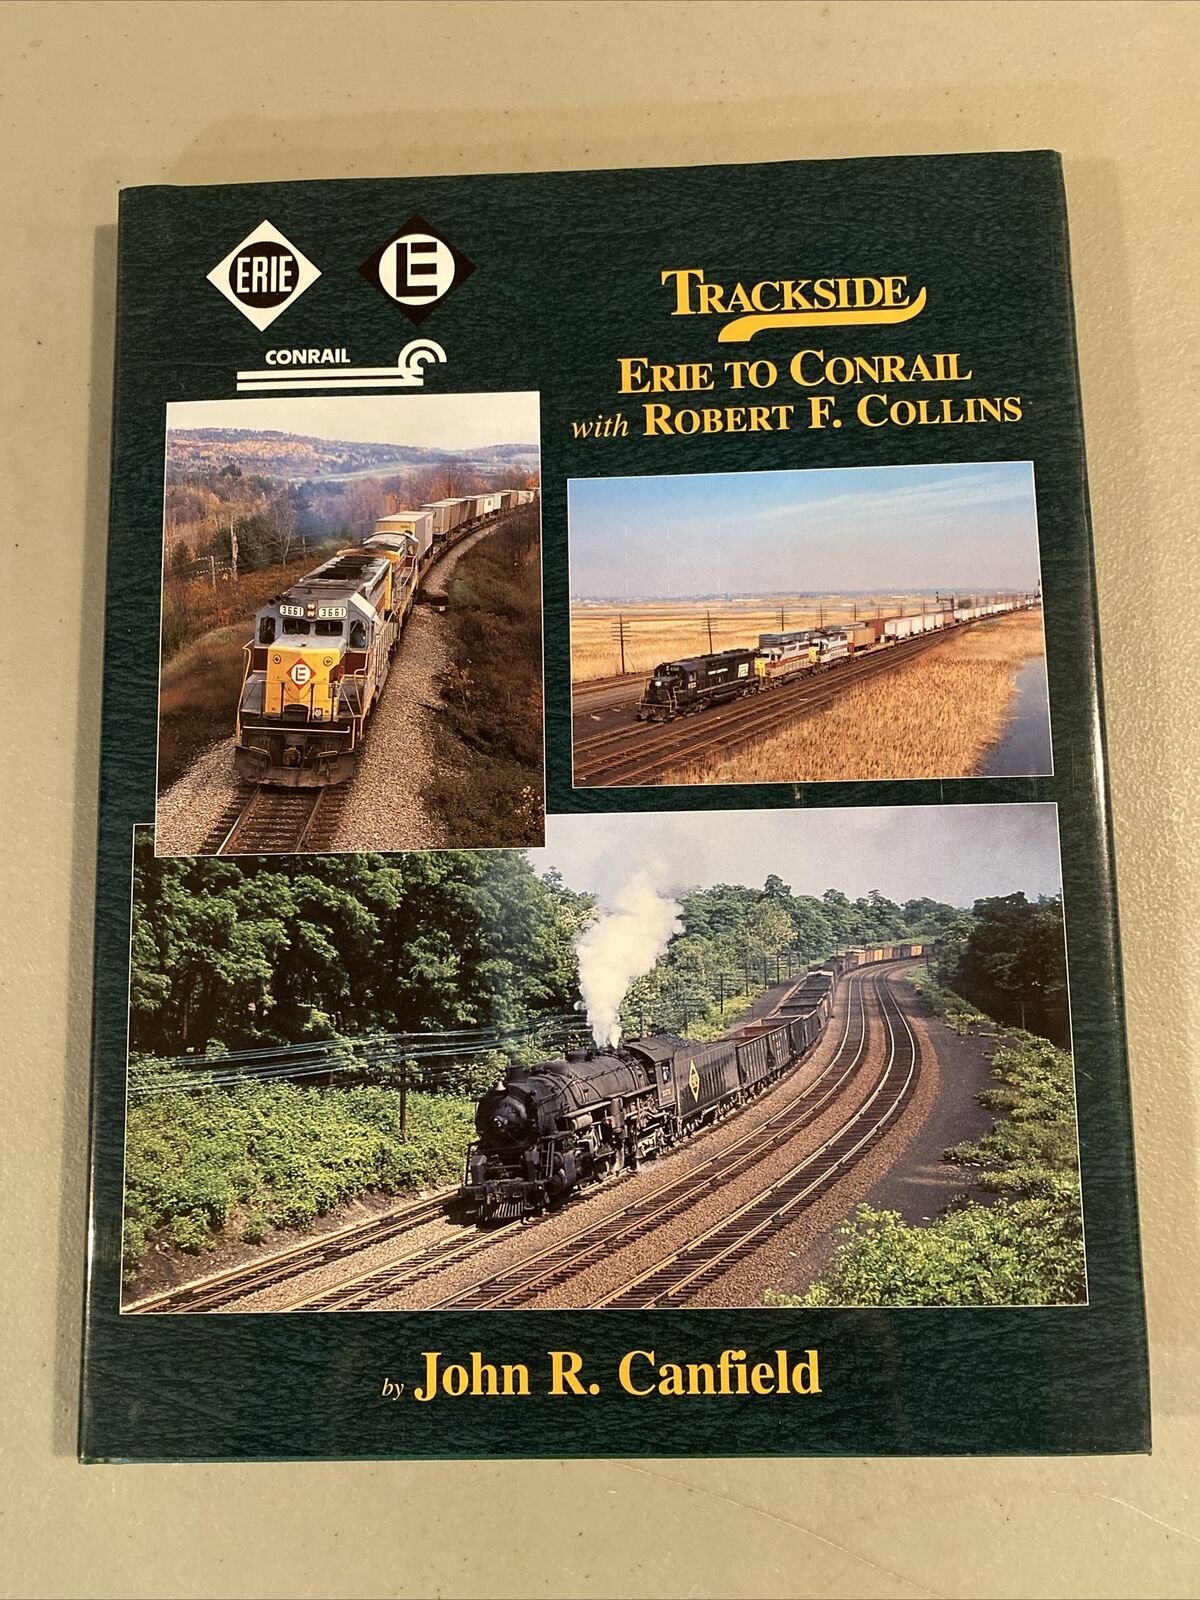 Trackside Erie to Conrail Book with Robert Collins By John Canfield, Morning Sun